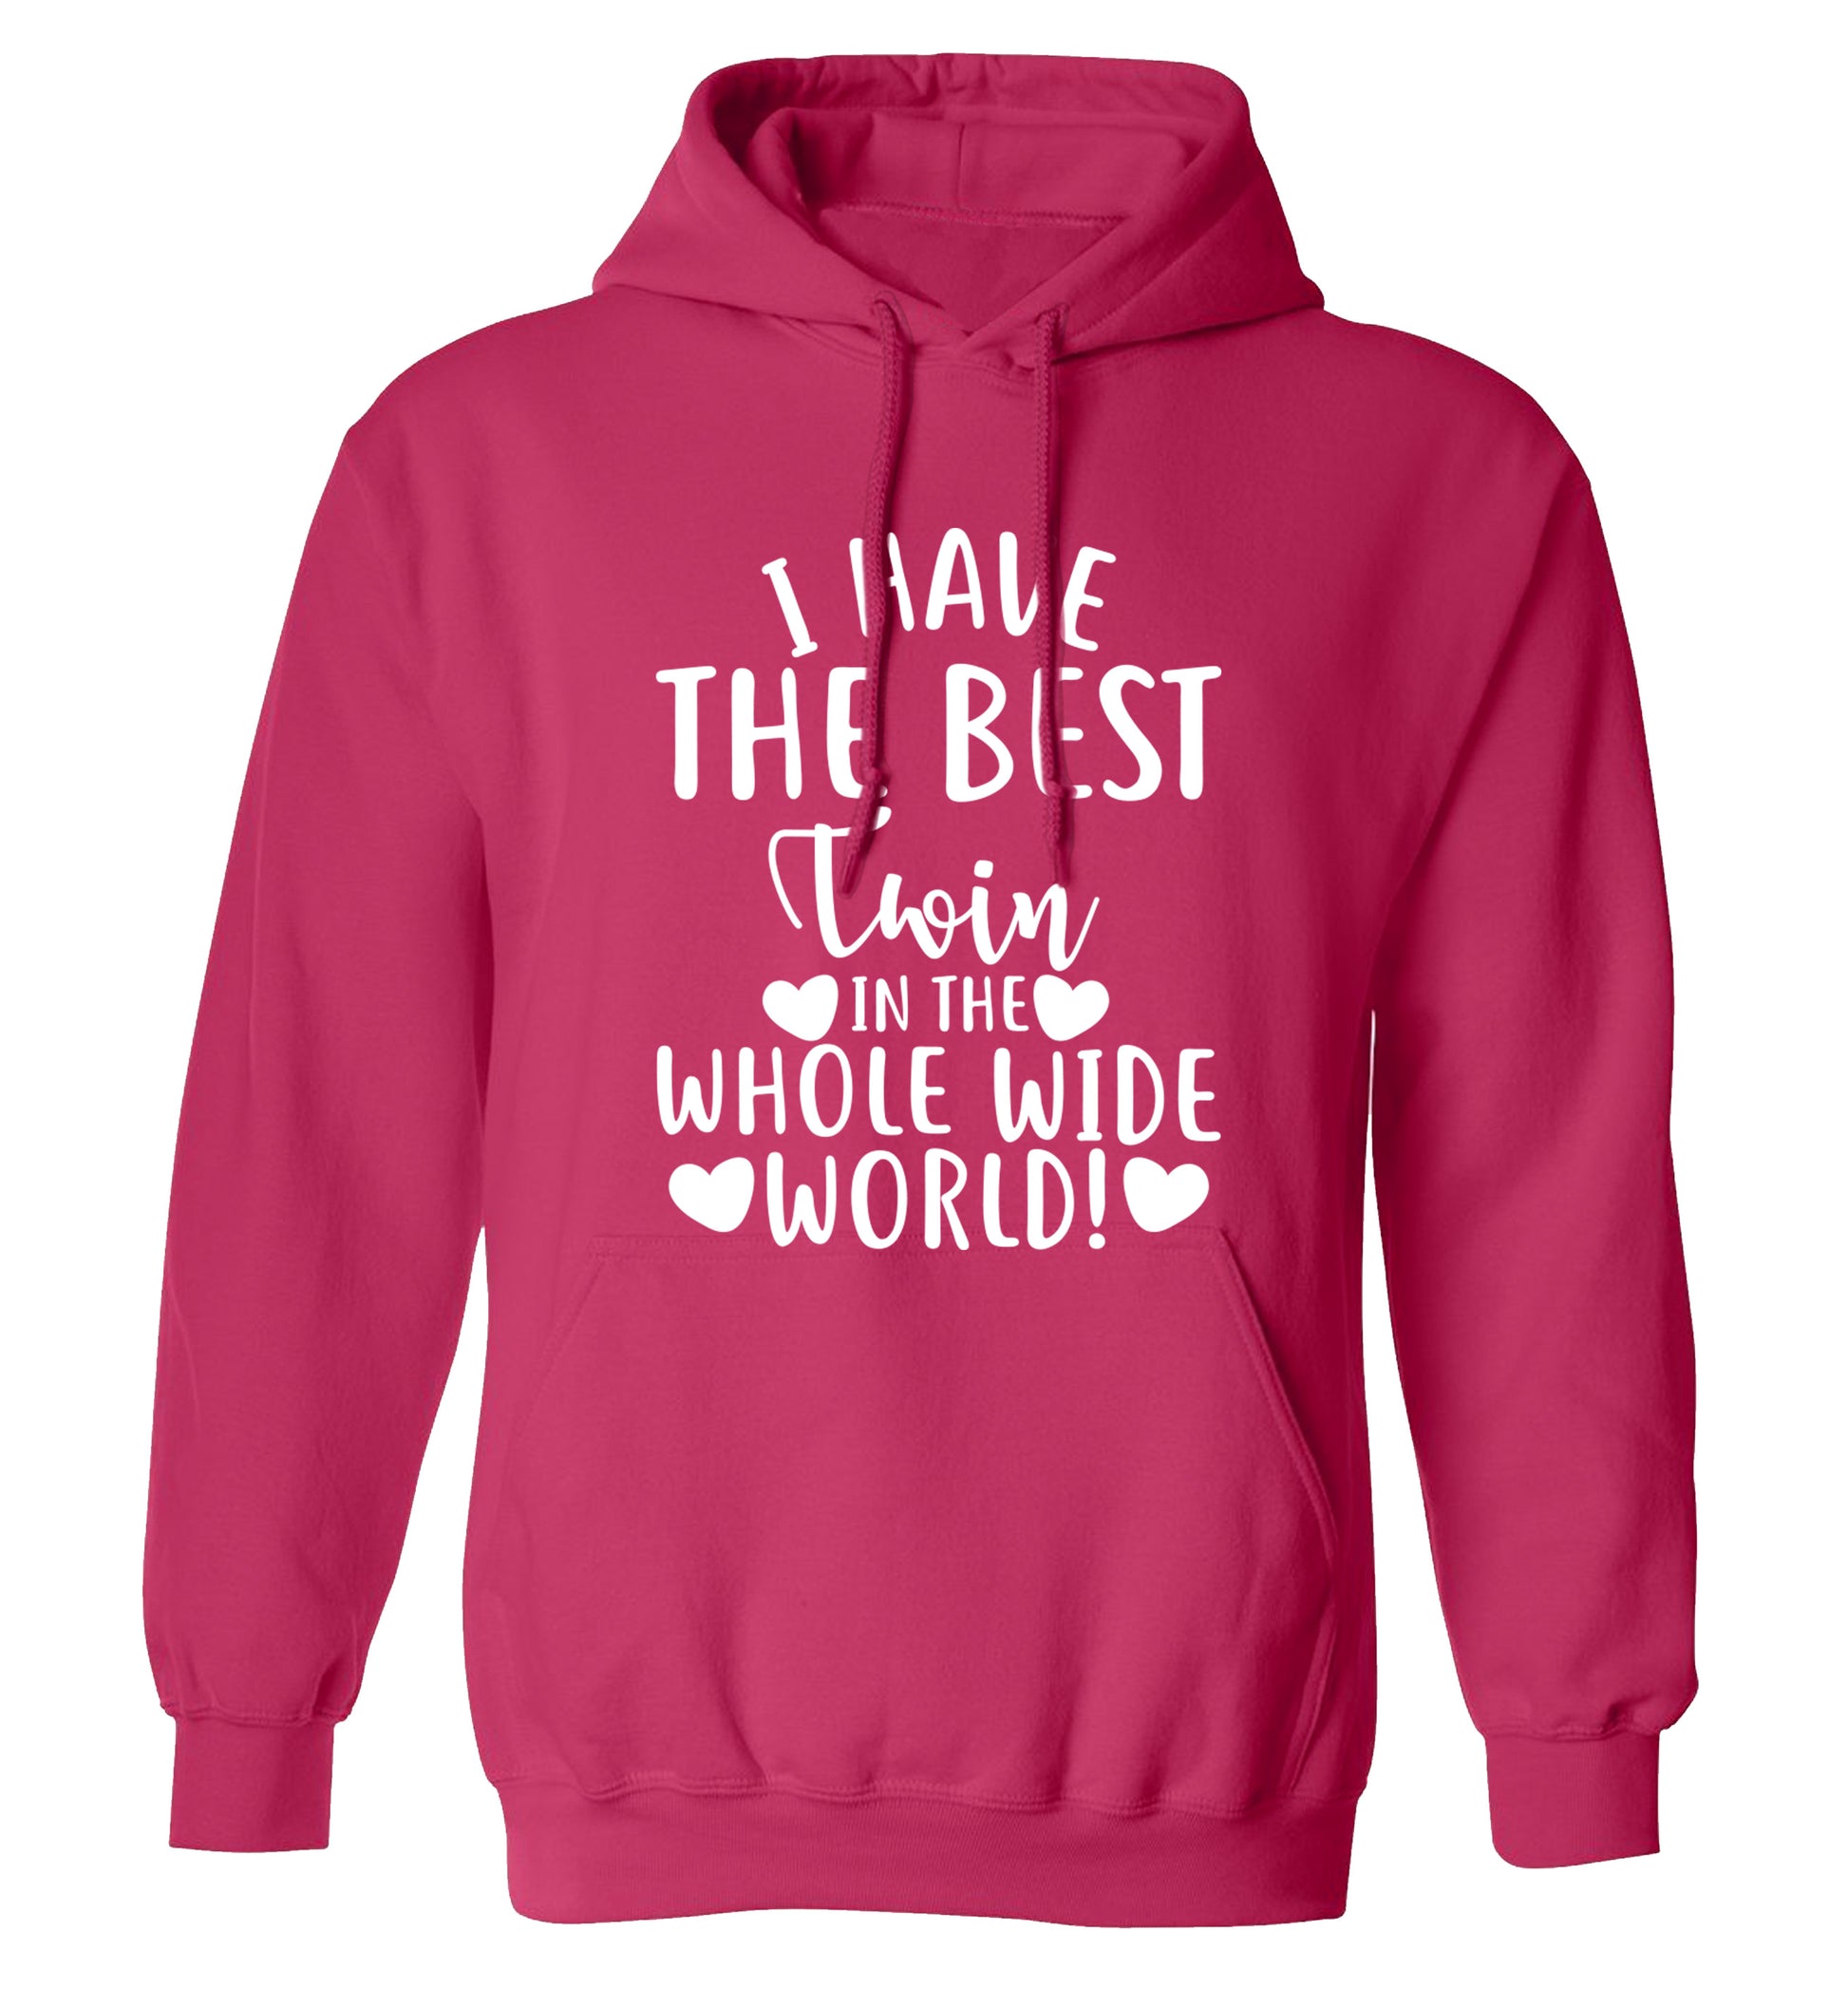 I have the best twin in the whole wide world! adults unisex pink hoodie 2XL